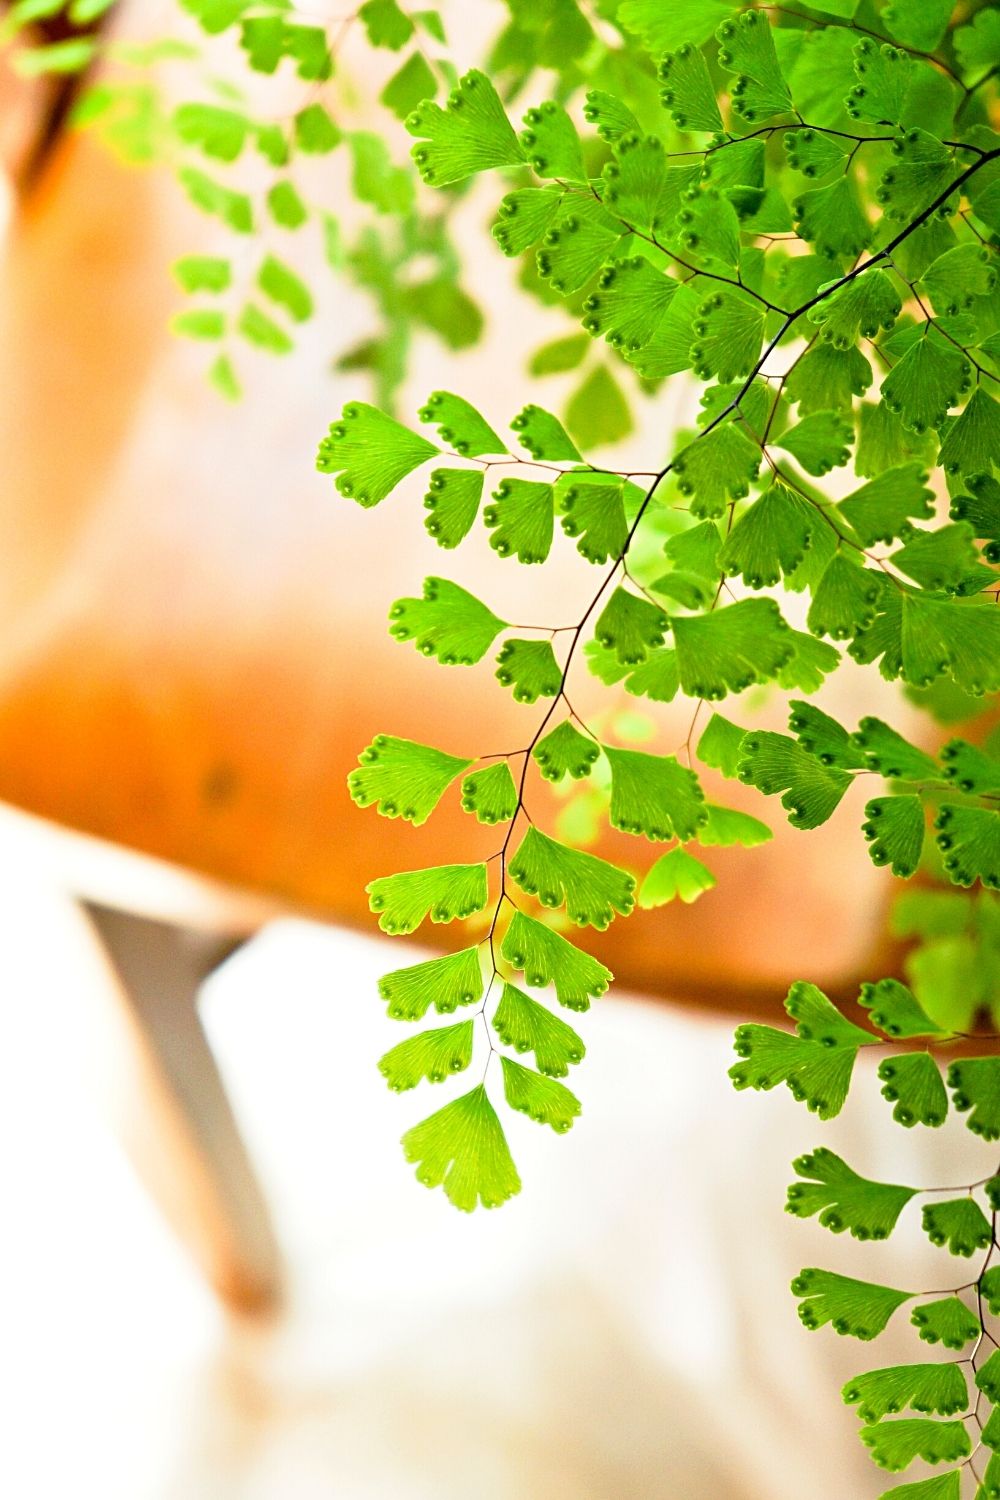 Maidenhair Fern is perfect for terrariums as they're non-toxic to pets